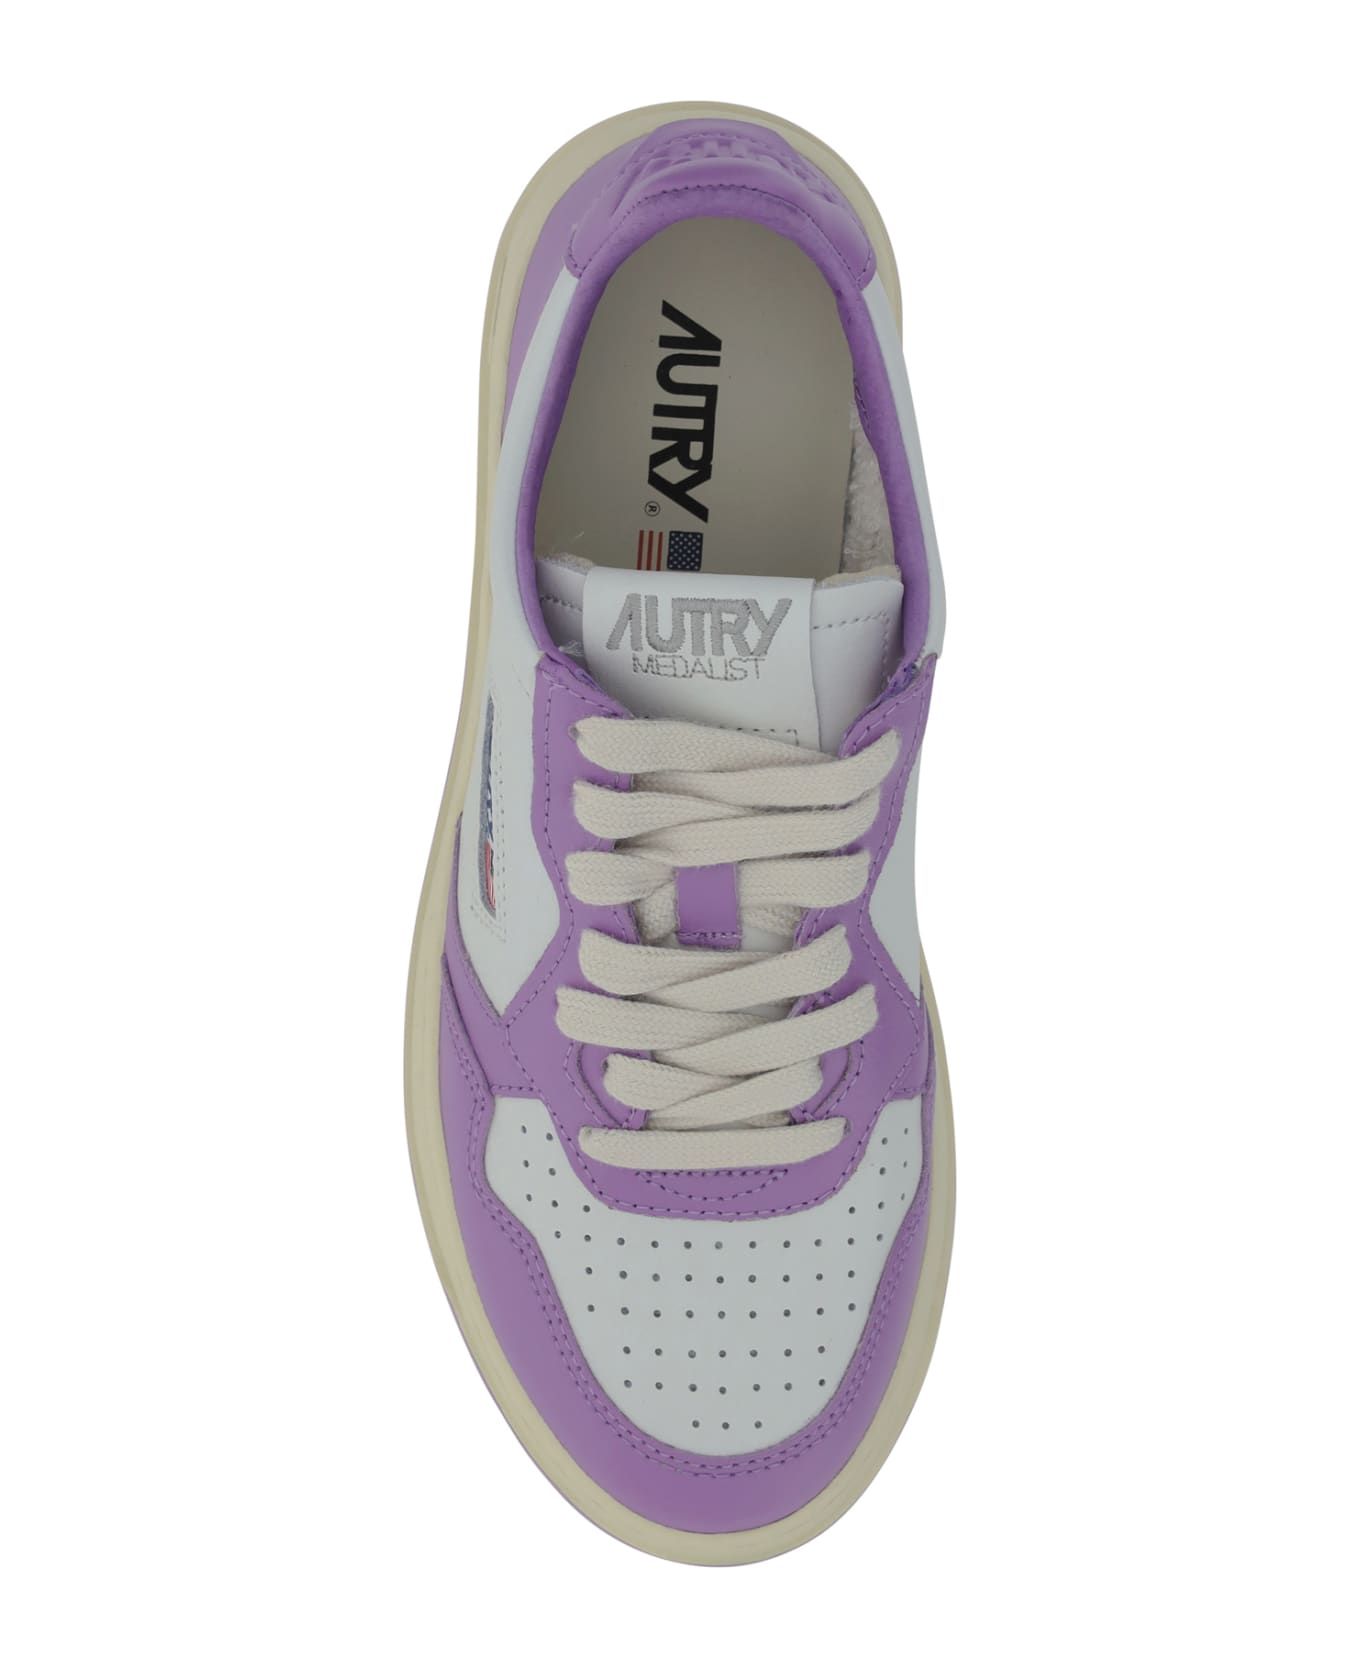 Autry Medalist Low Sneakers - Wht/ Eng Lav